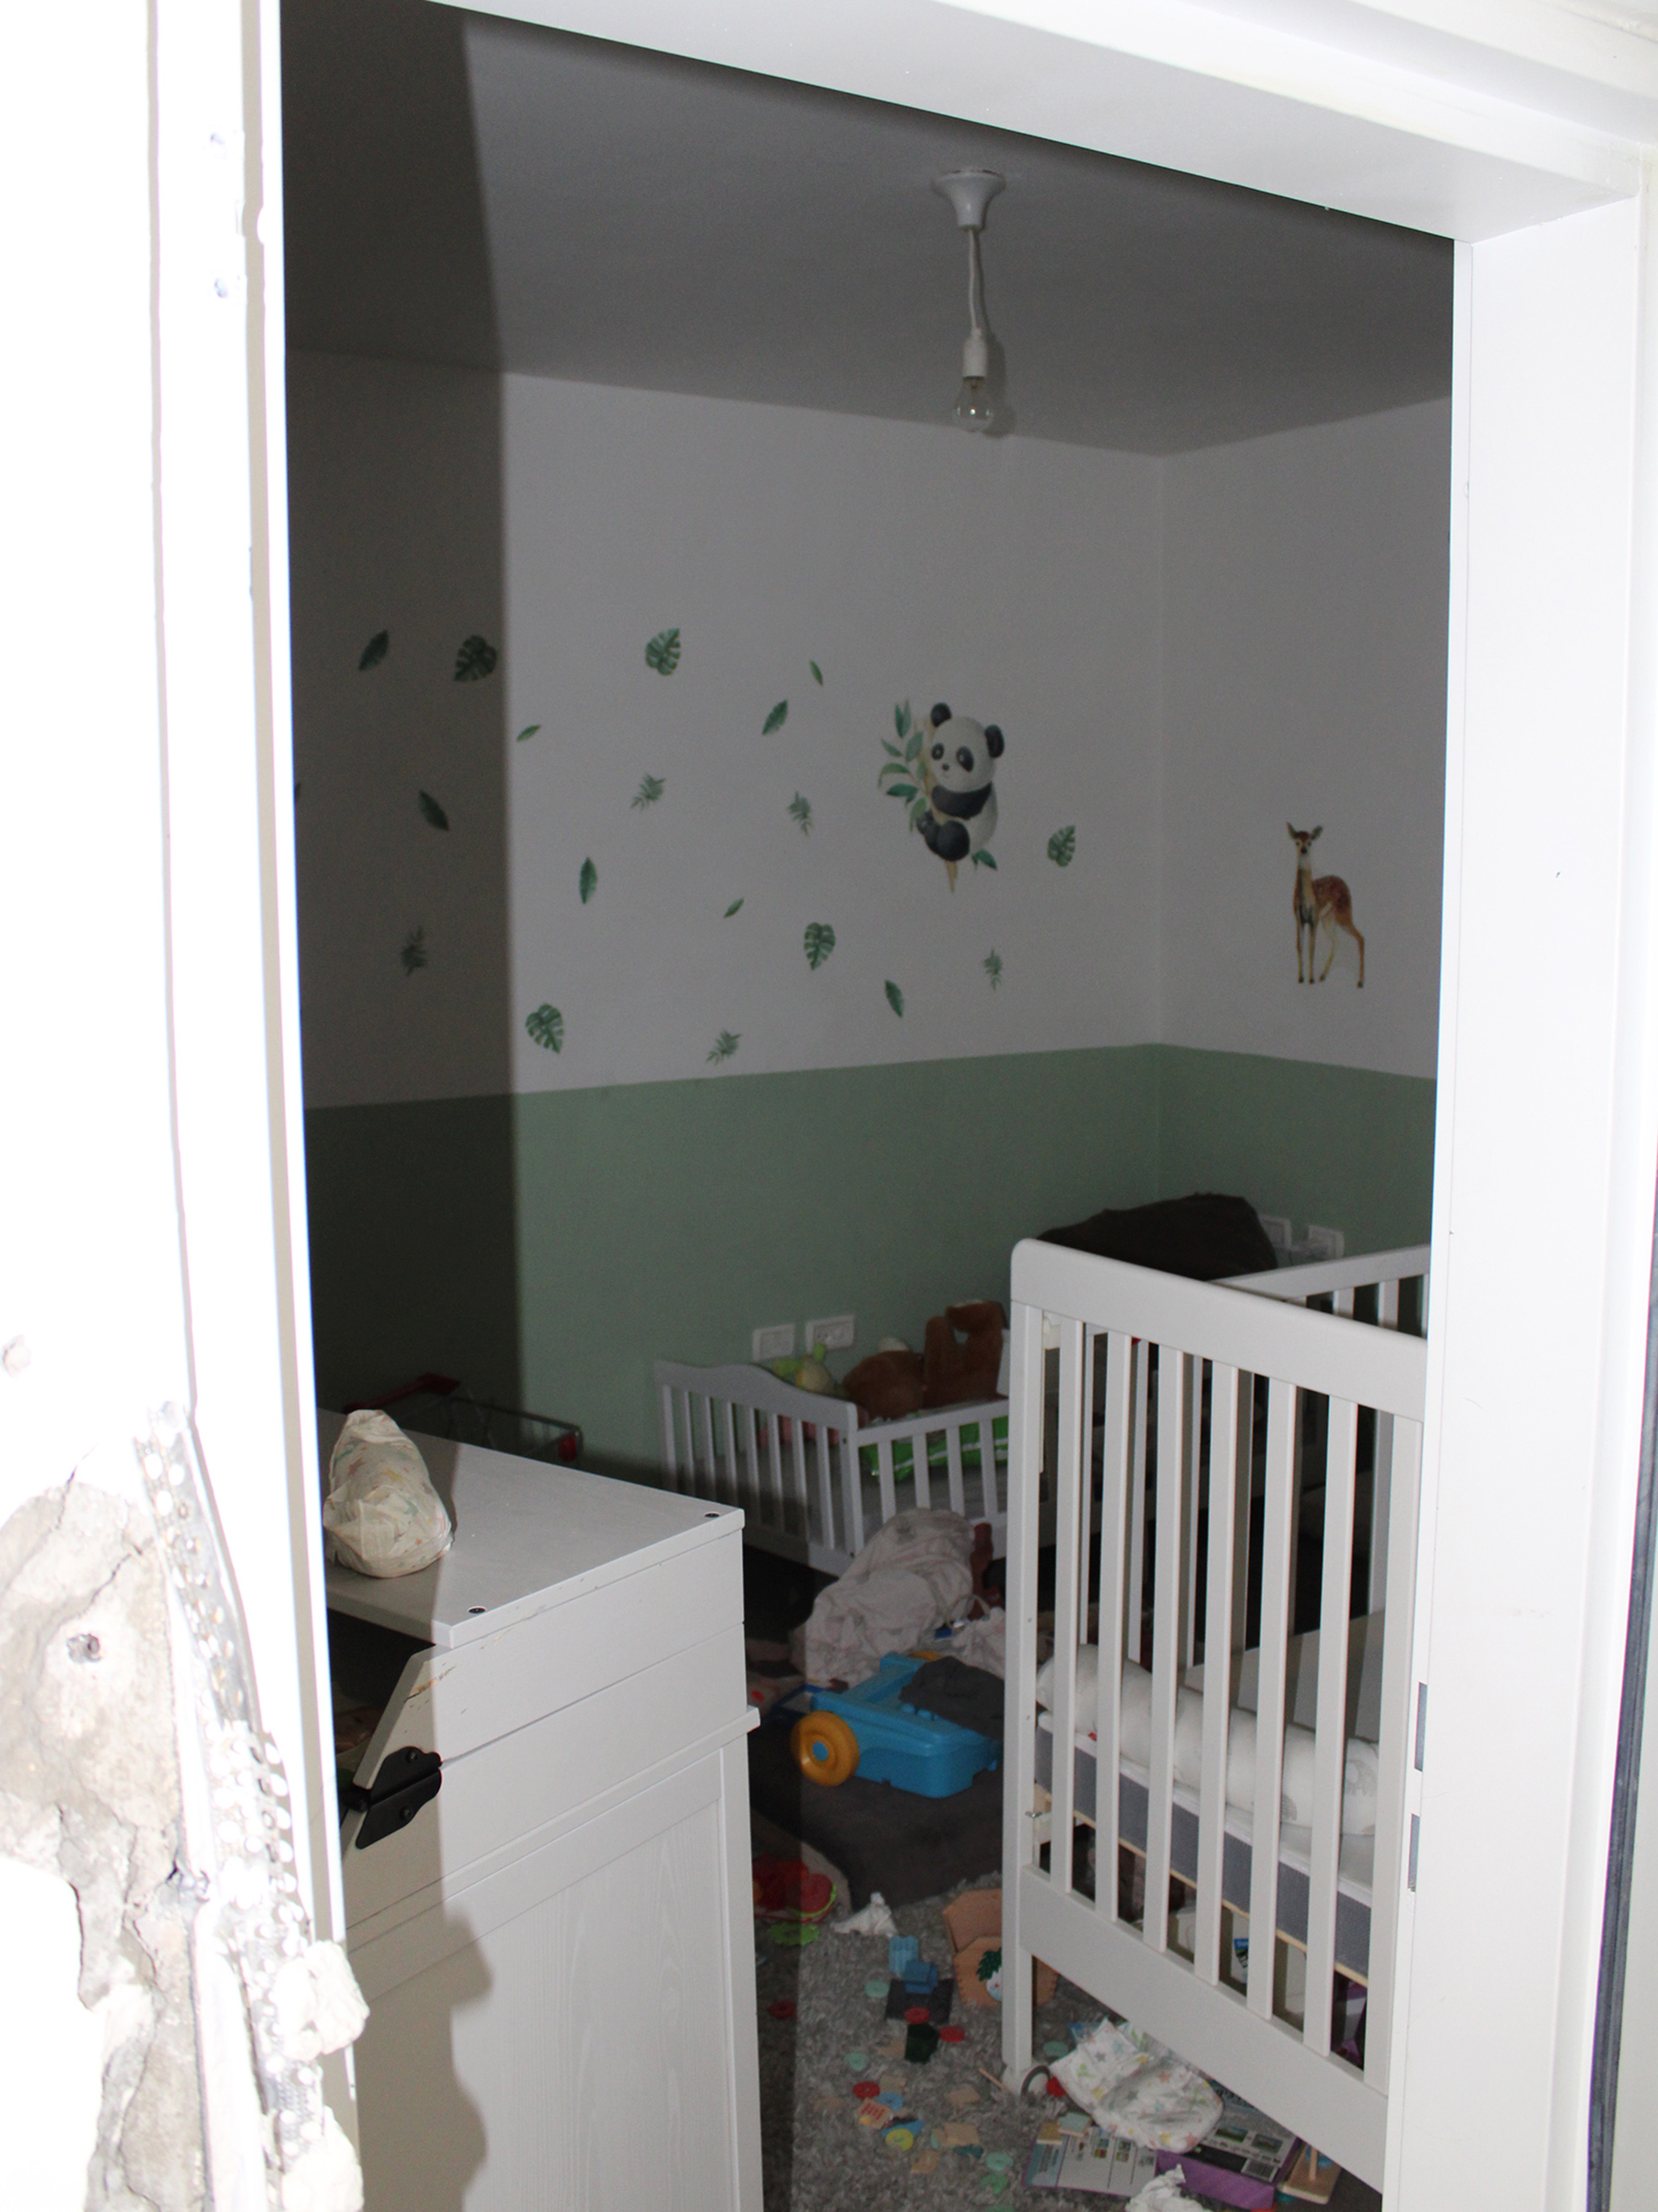 A family hid inside this bedroom while Hamas fighters attacked on Oct. 7. The family survived.